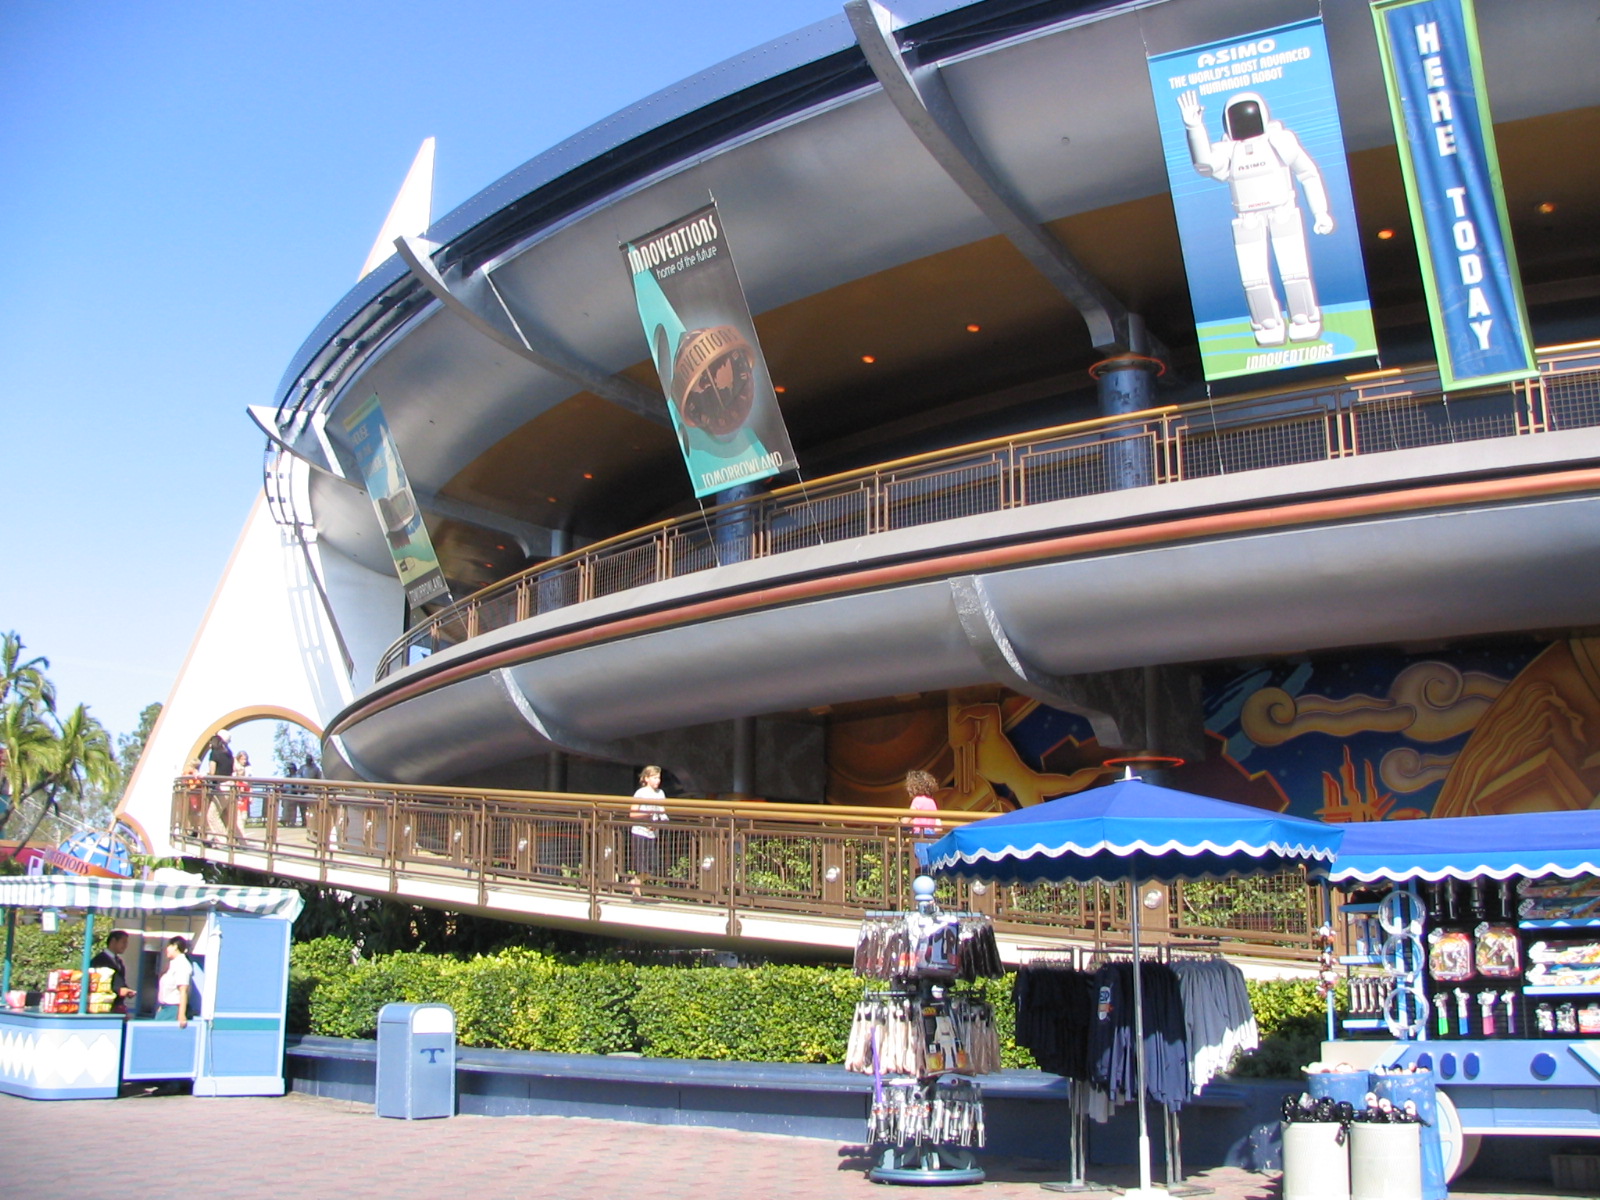 Disneyland’s New Innoventions Rumored to Open in November